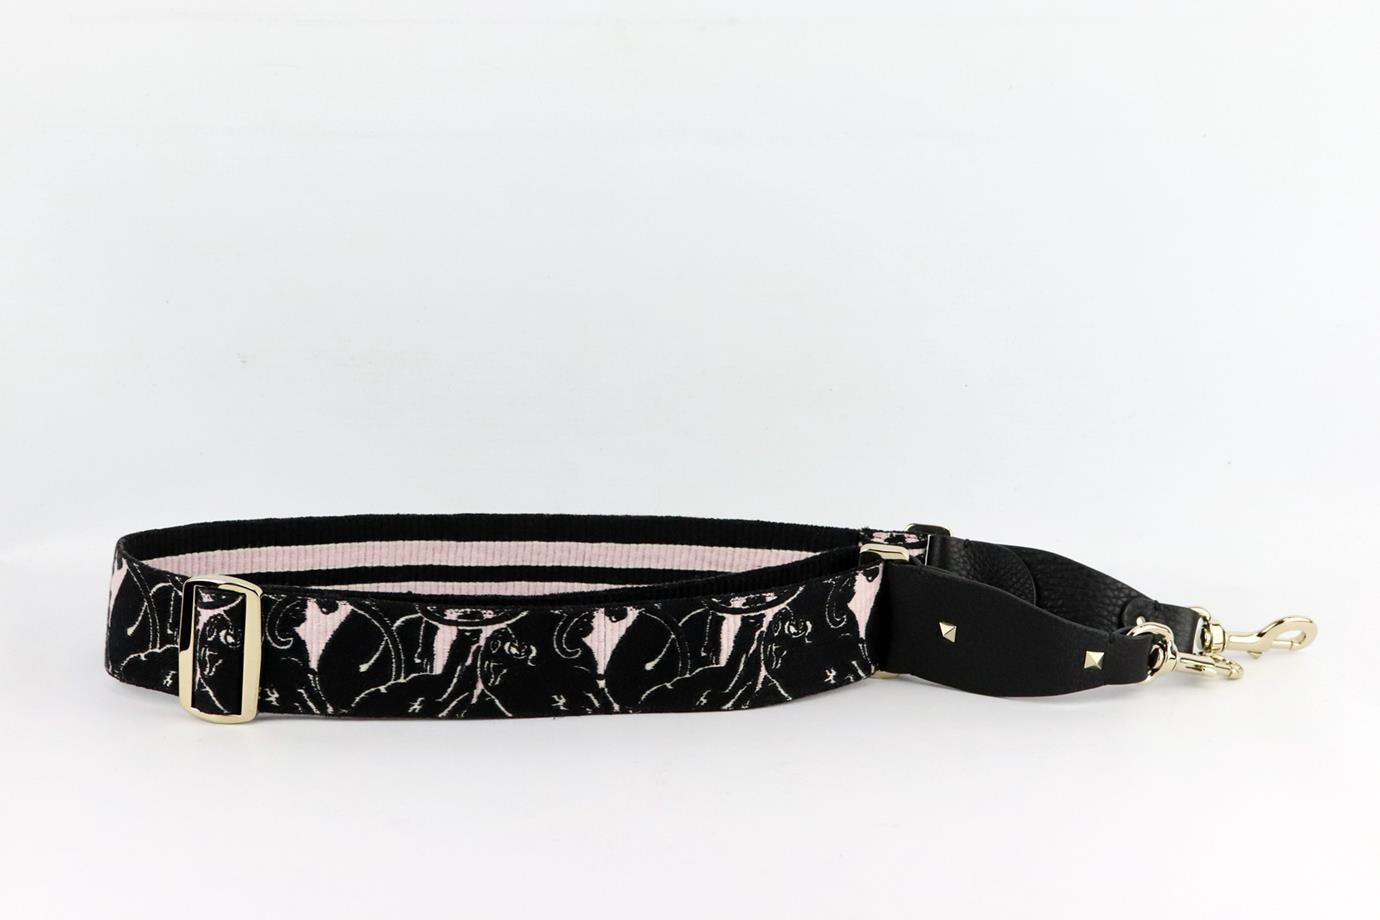 Valentino Garavani embroidered canvas and leather bag strap. Black, pink and white. Lobster clasp fastening at base. Does not come with box or dustbag. Max. Length: 51 in. Min. Length: 34 in. Width: 2 in. Very good condition - No sign of wear; see